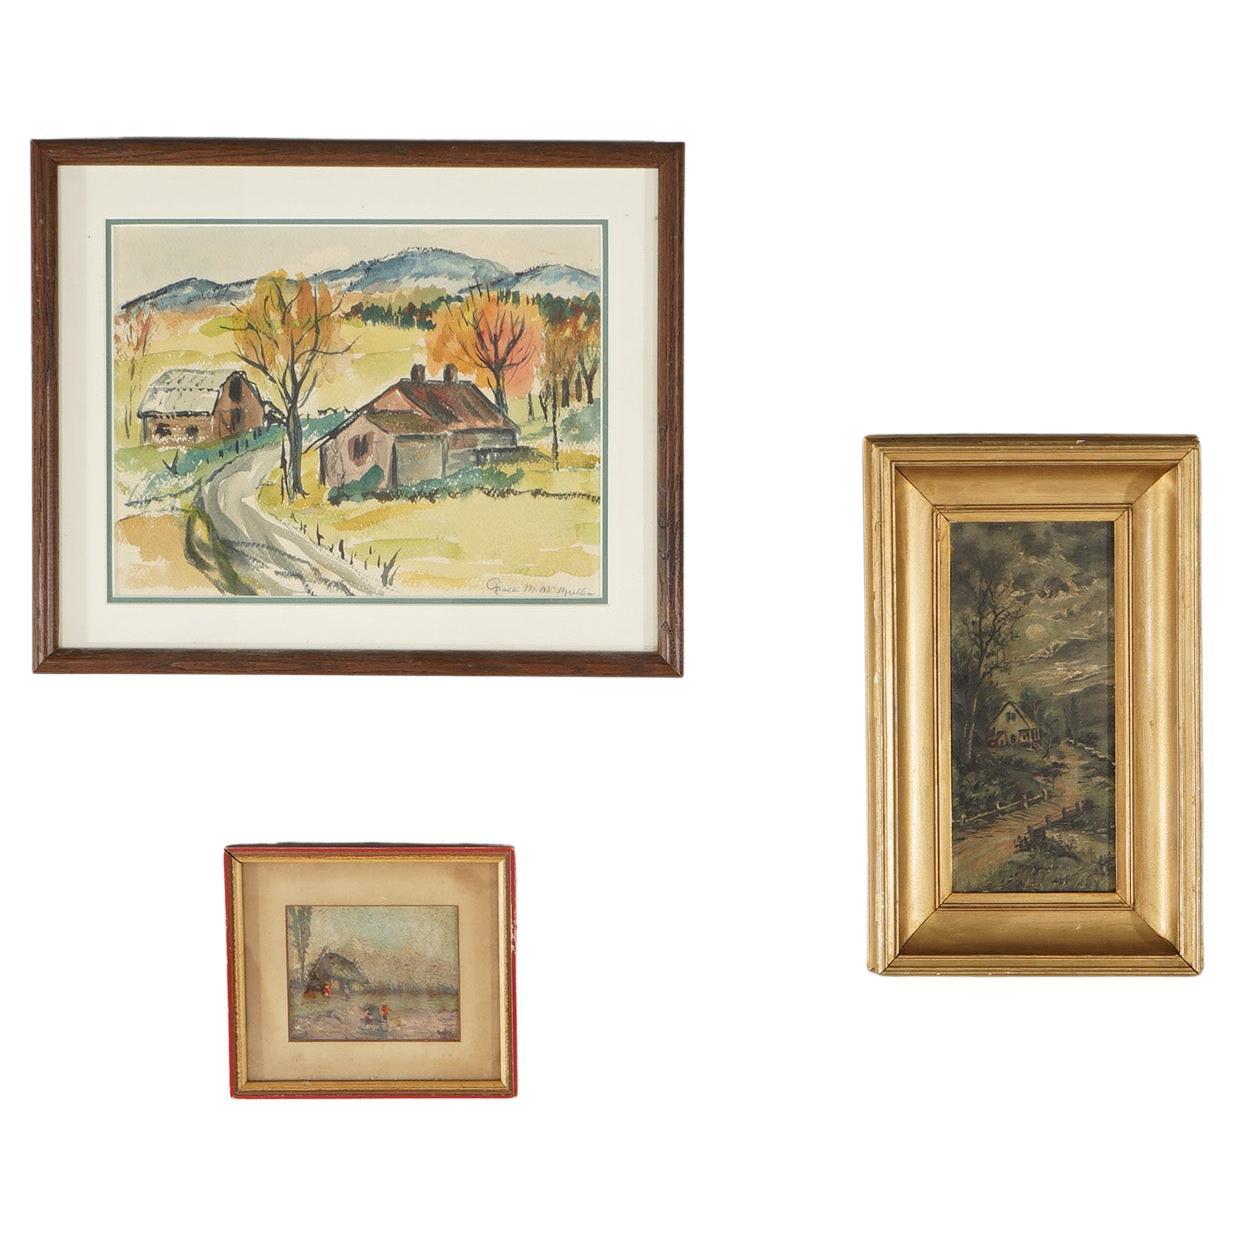 Two Antique Landscape Oil on Board & One Watercolor Painting, Framed, C1920